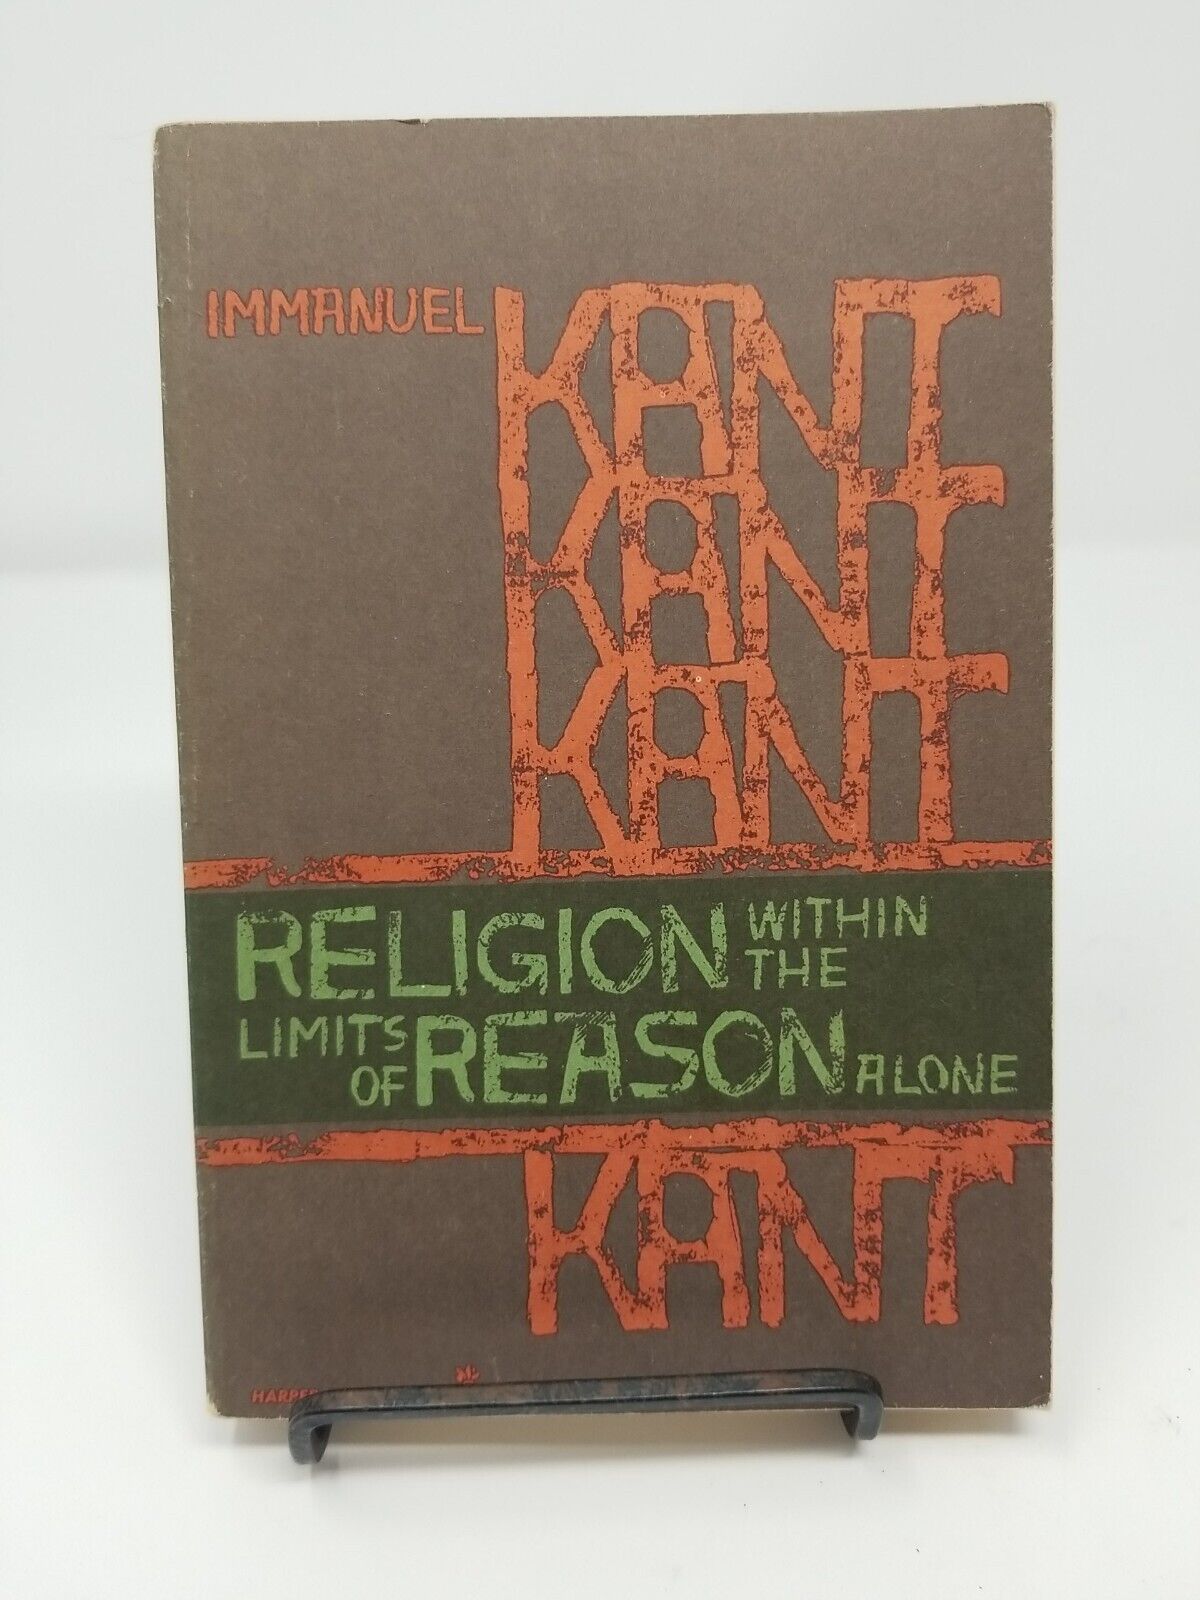 Religion Within The Limits of Reason Alone (Paperback) Immanuel Kant